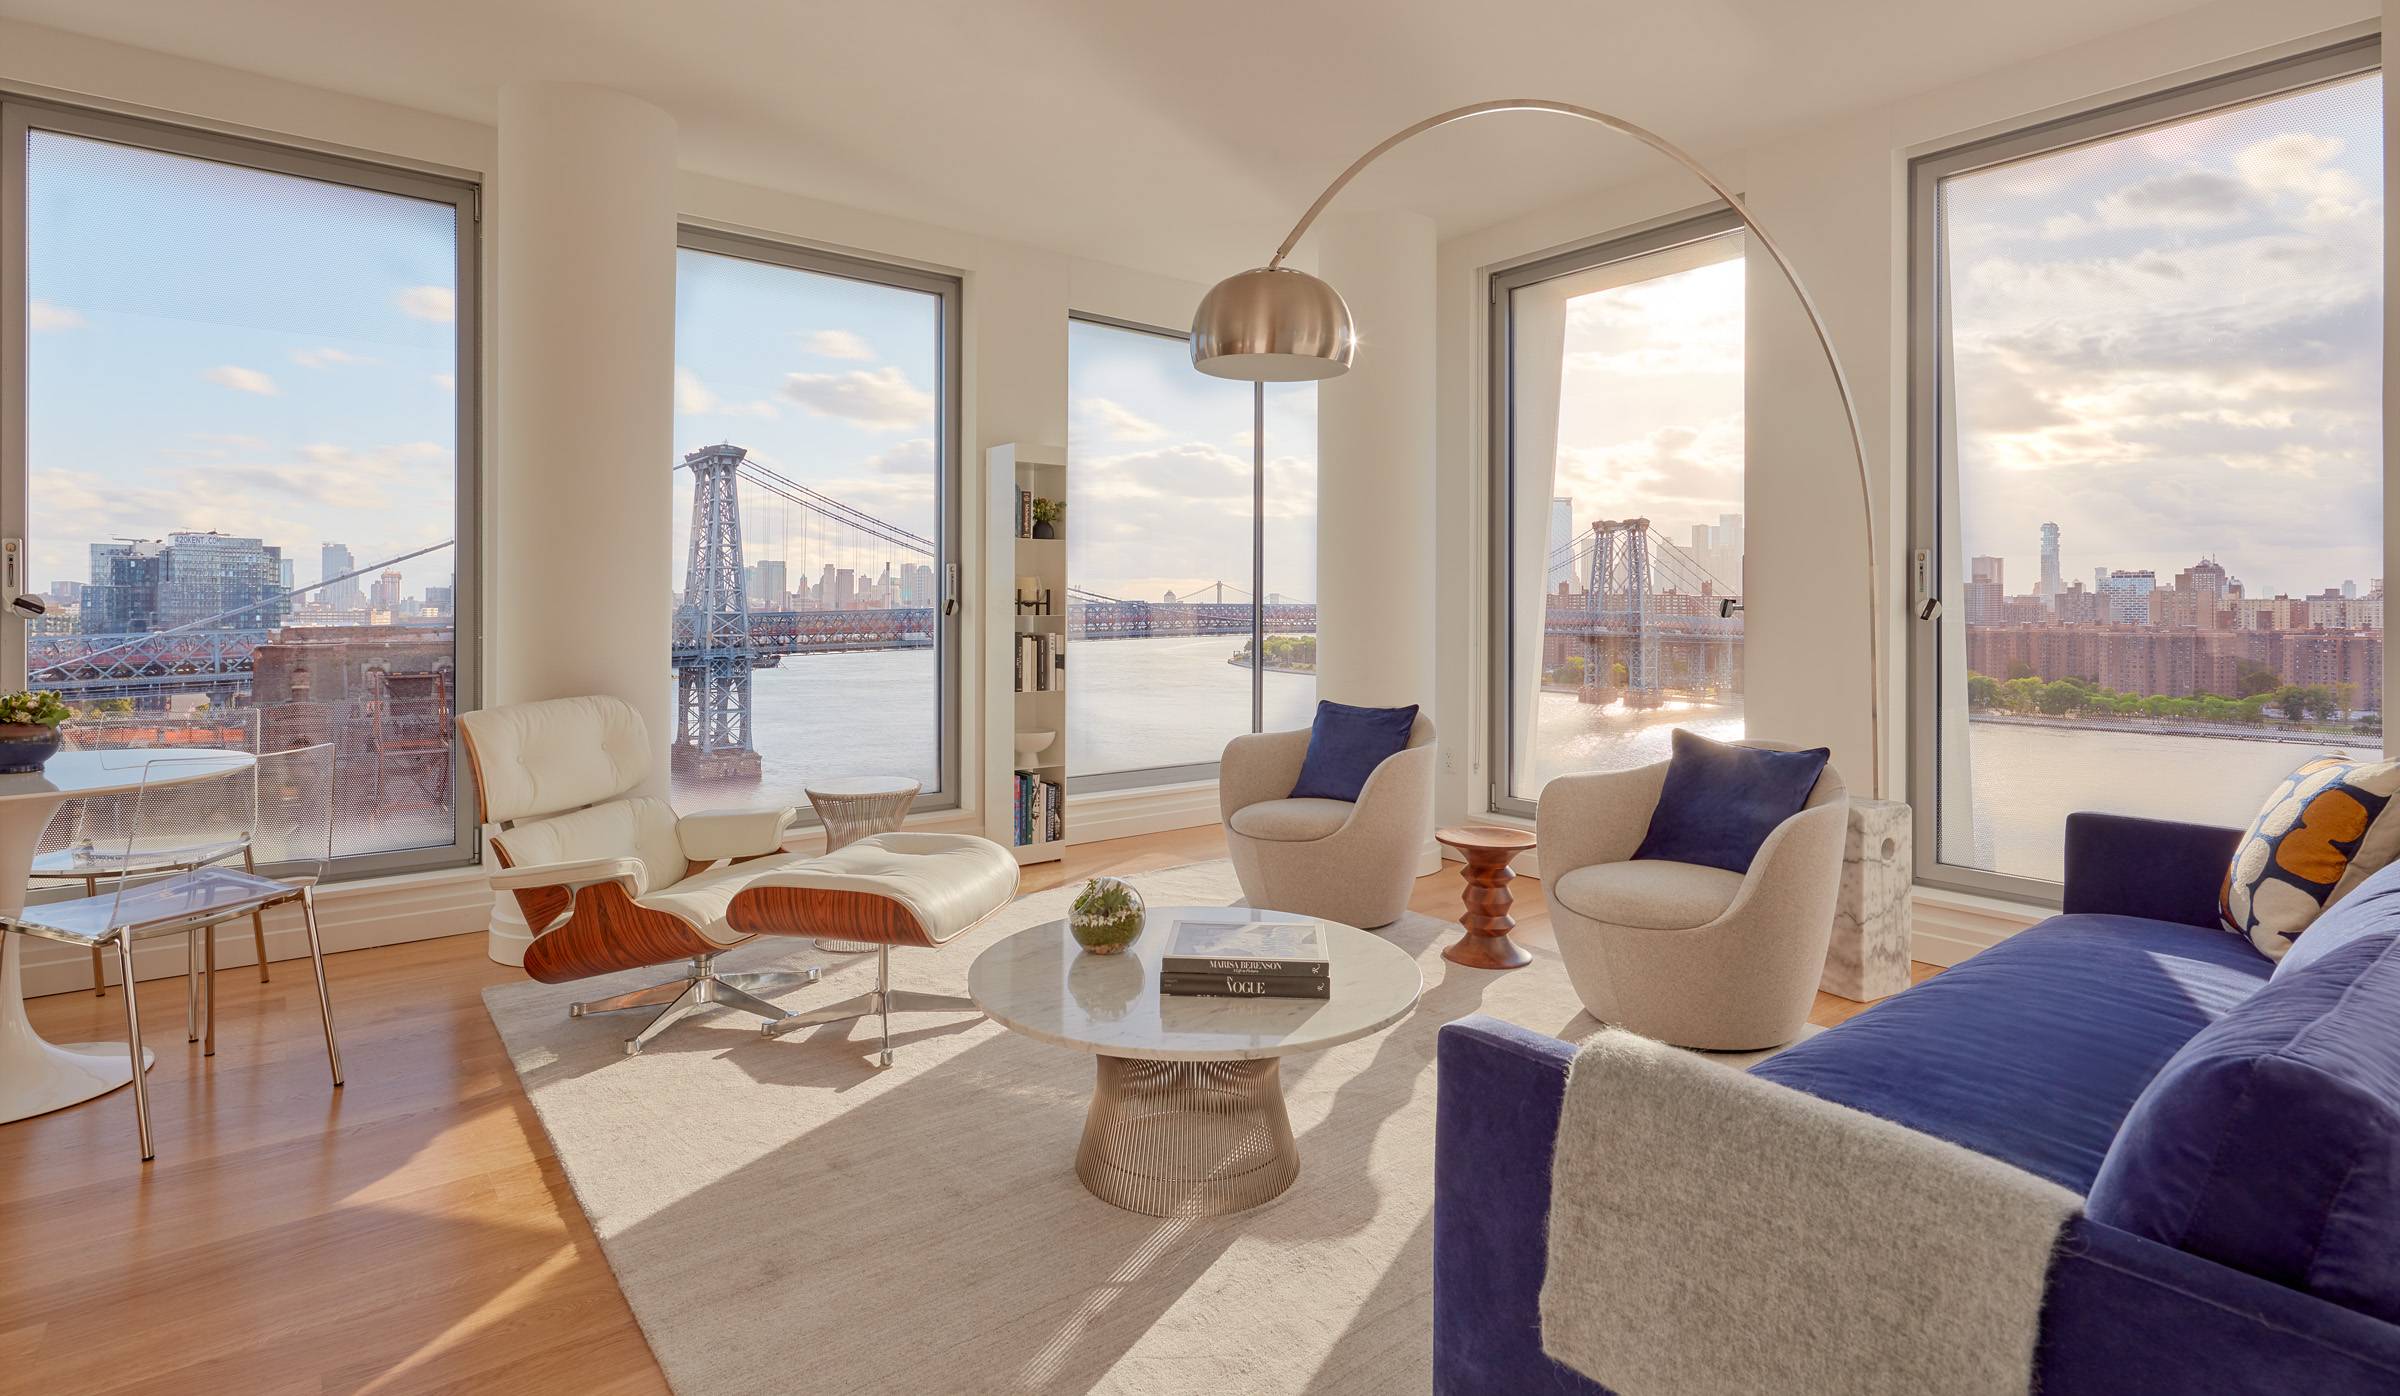 2  BEDROOM WITH BREATHTAKING VIEWS AND IMMENSE NATURAL LIGHT IN WILLIAMSBURG